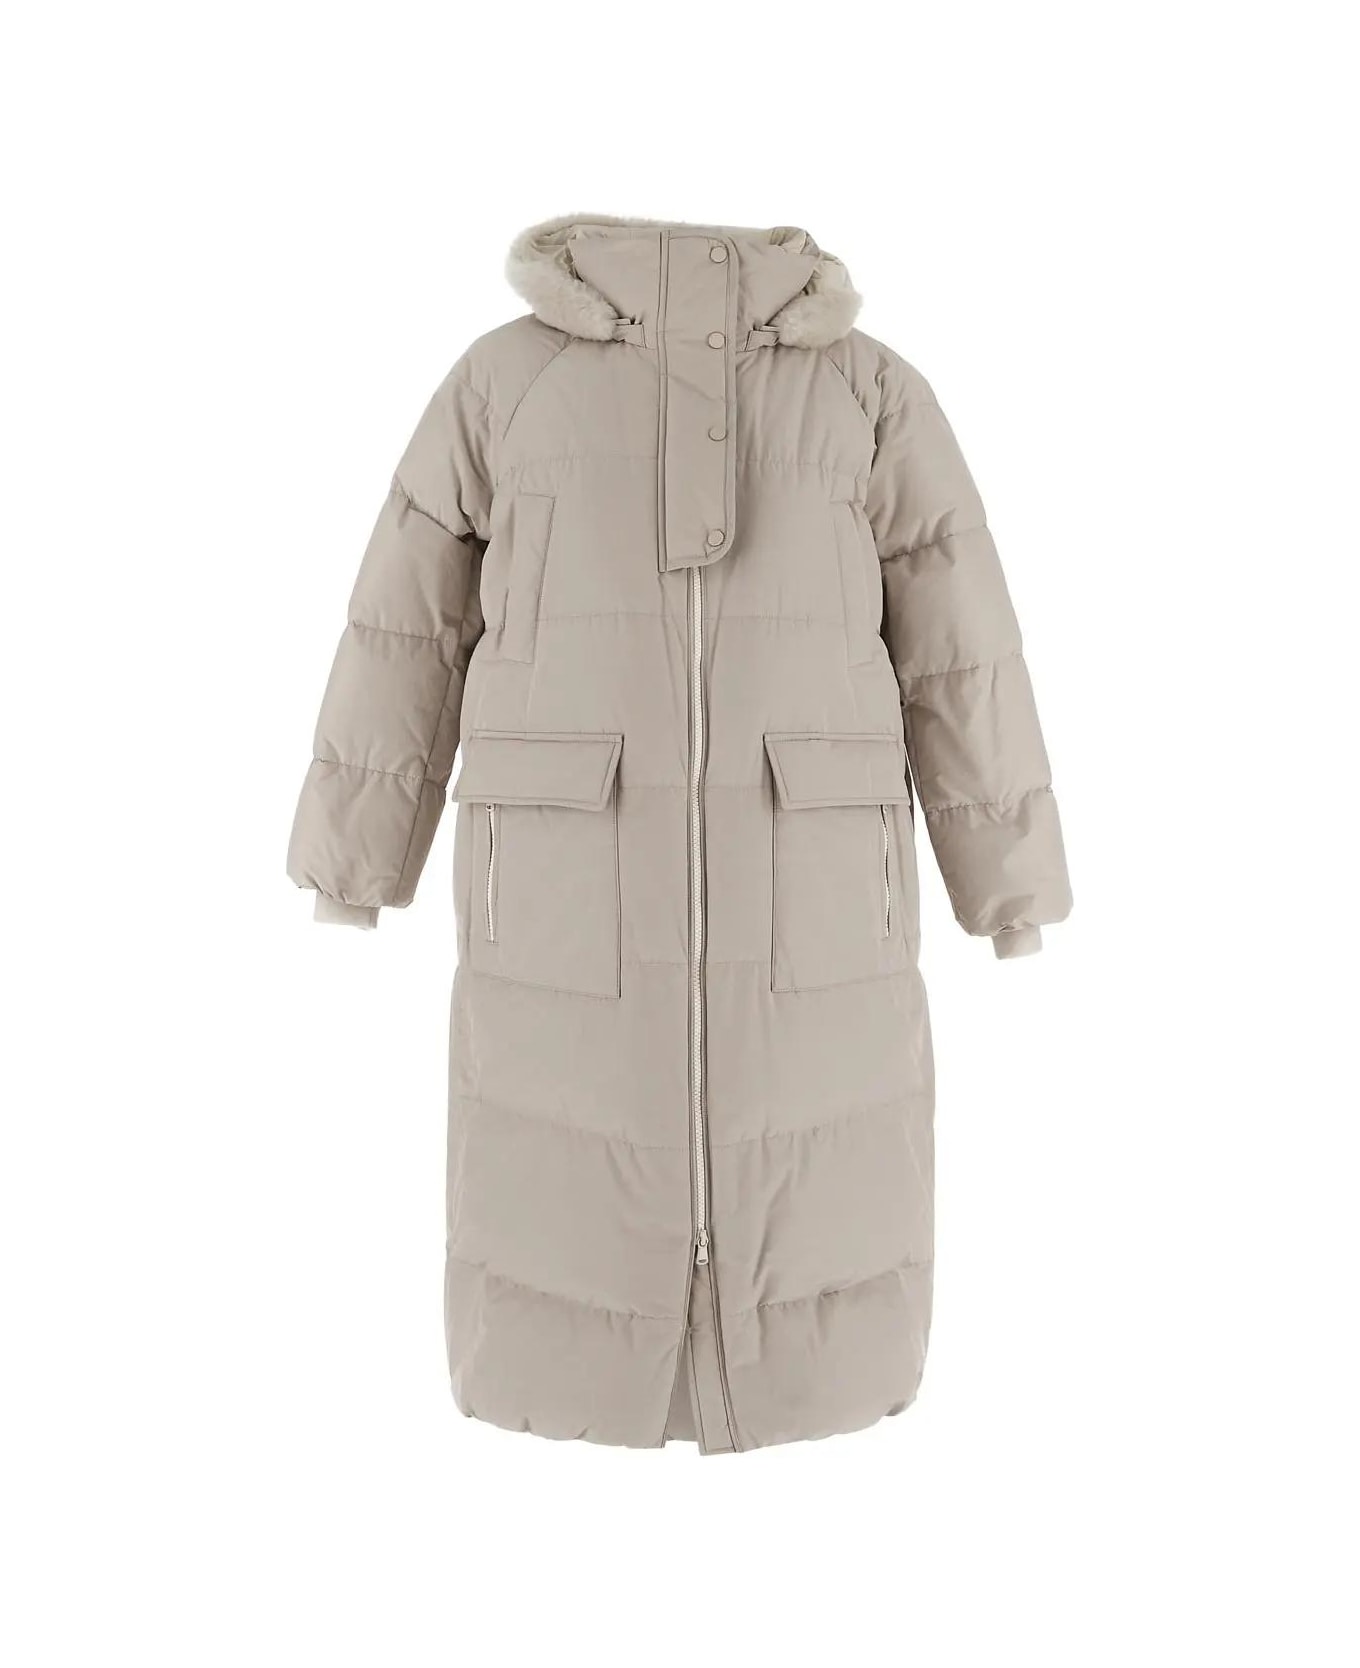 Brunello Cucinelli Long Down Jacket With Detachable Hood - Grey Plaster